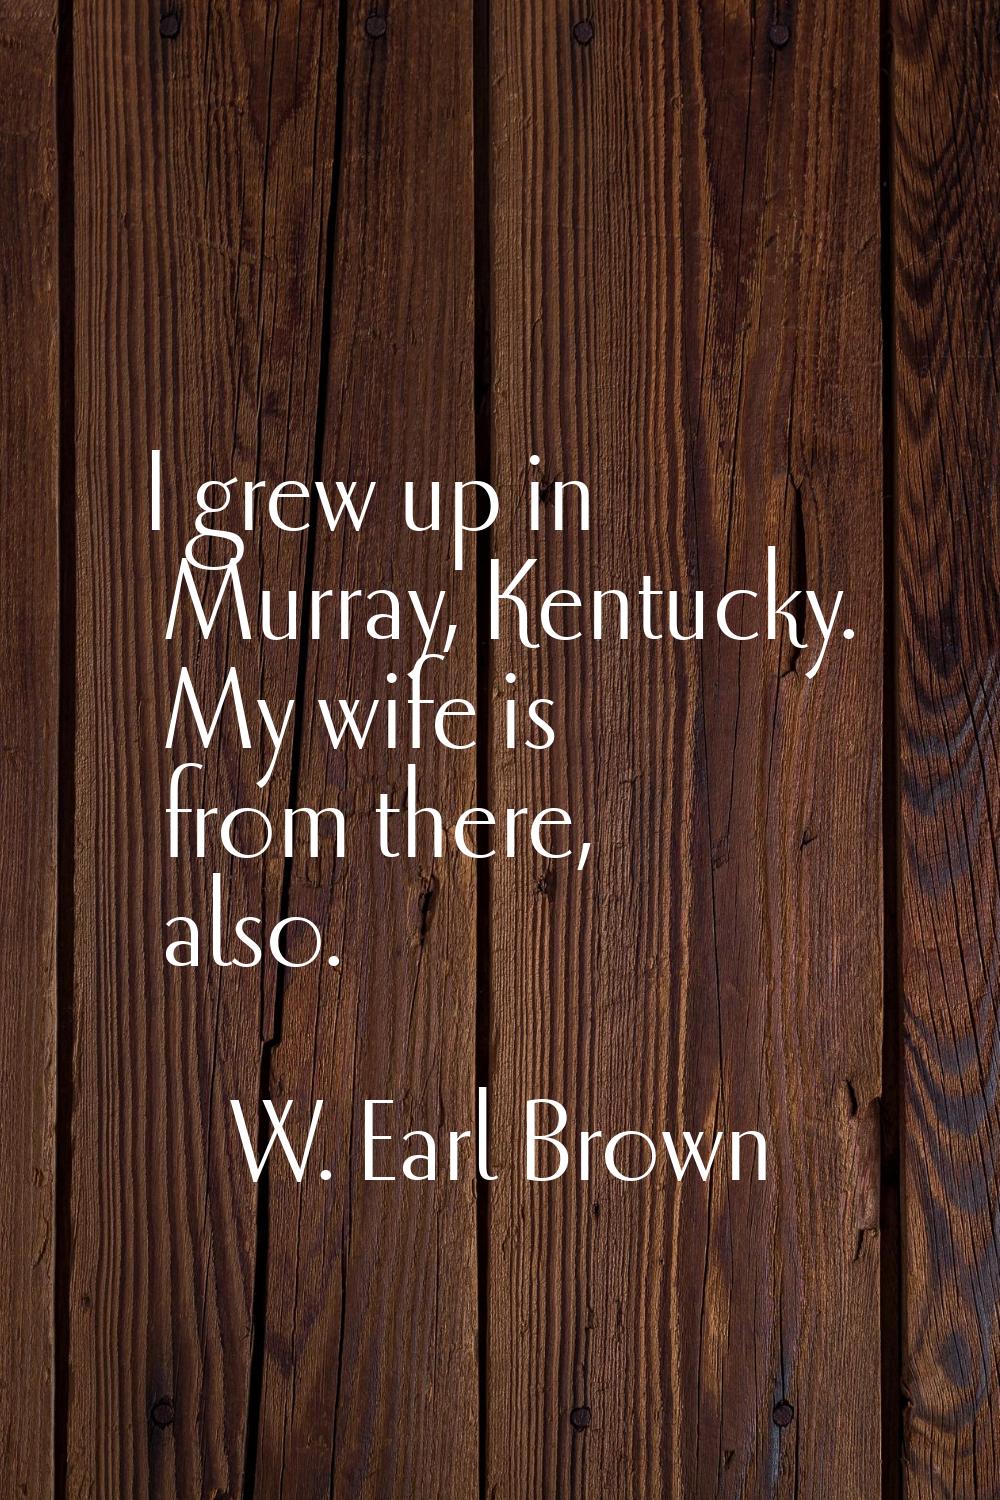 I grew up in Murray, Kentucky. My wife is from there, also.